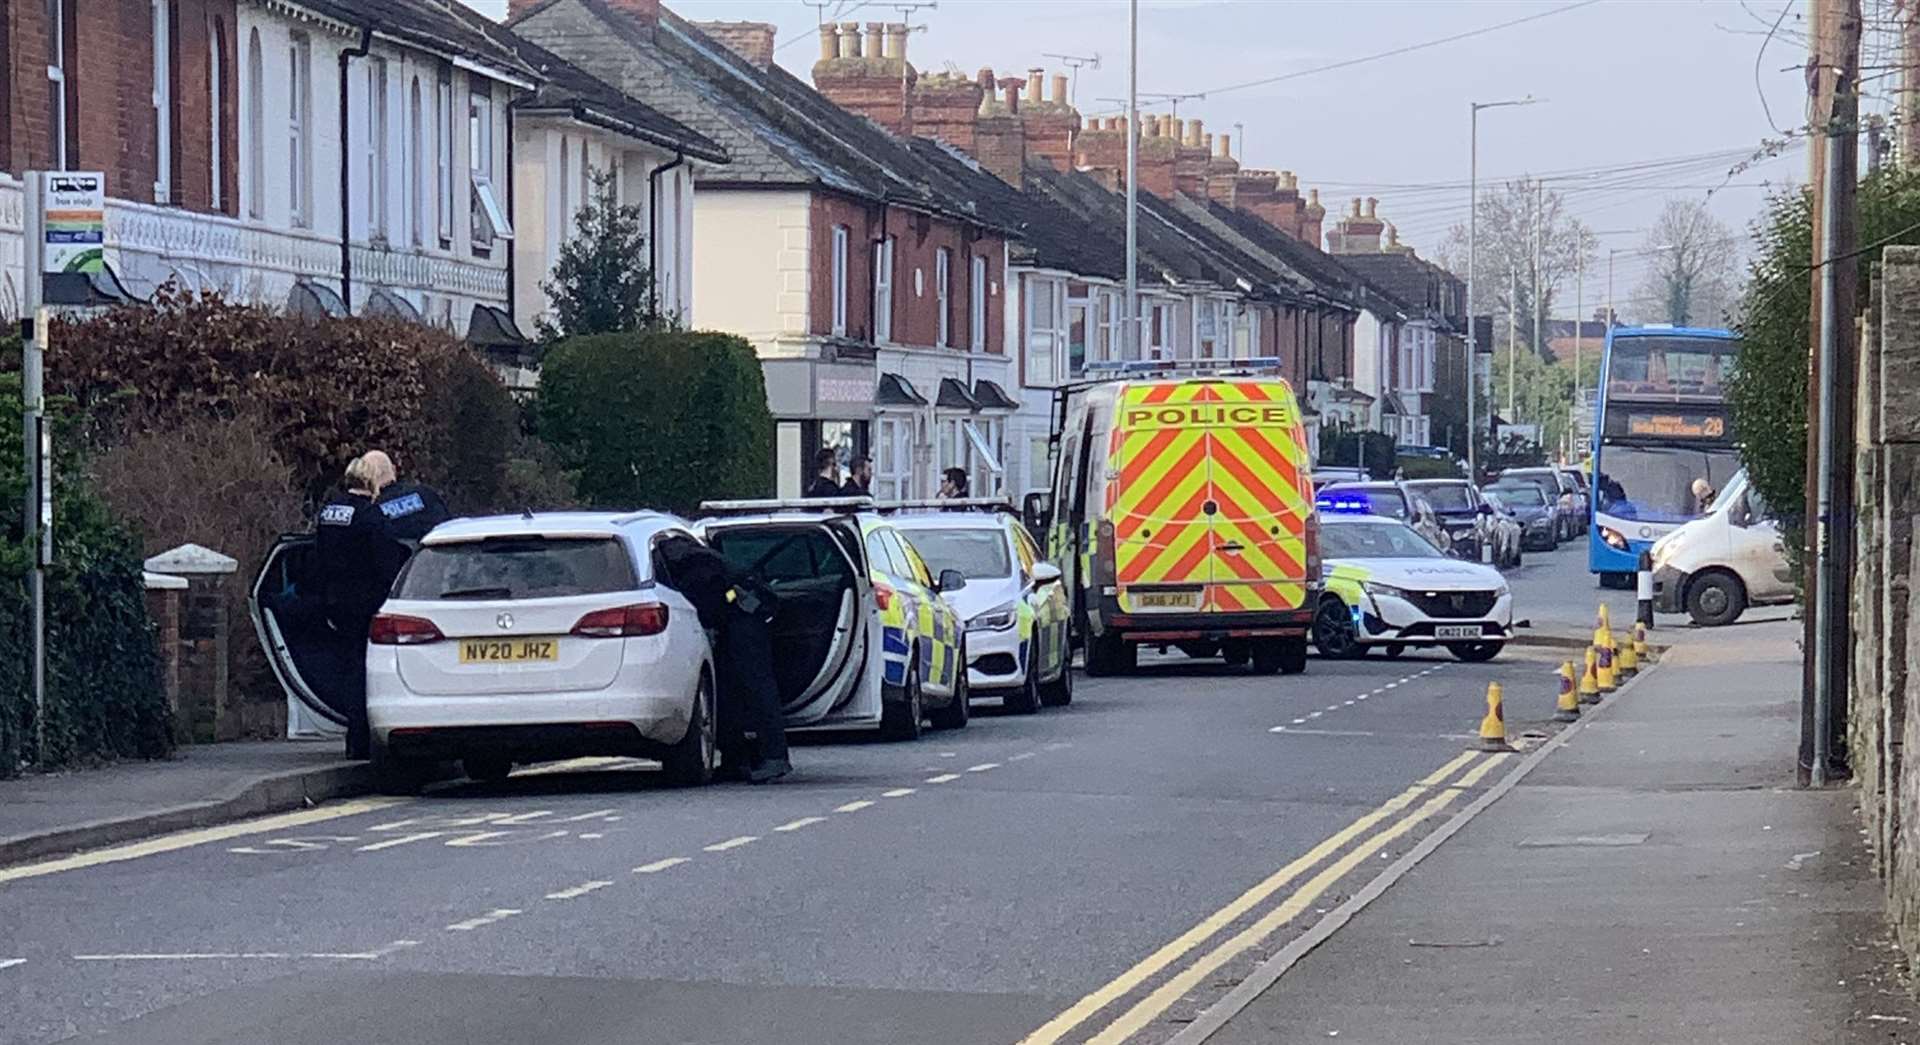 Two police cars and a police van were spotted in nearby Beaver Road